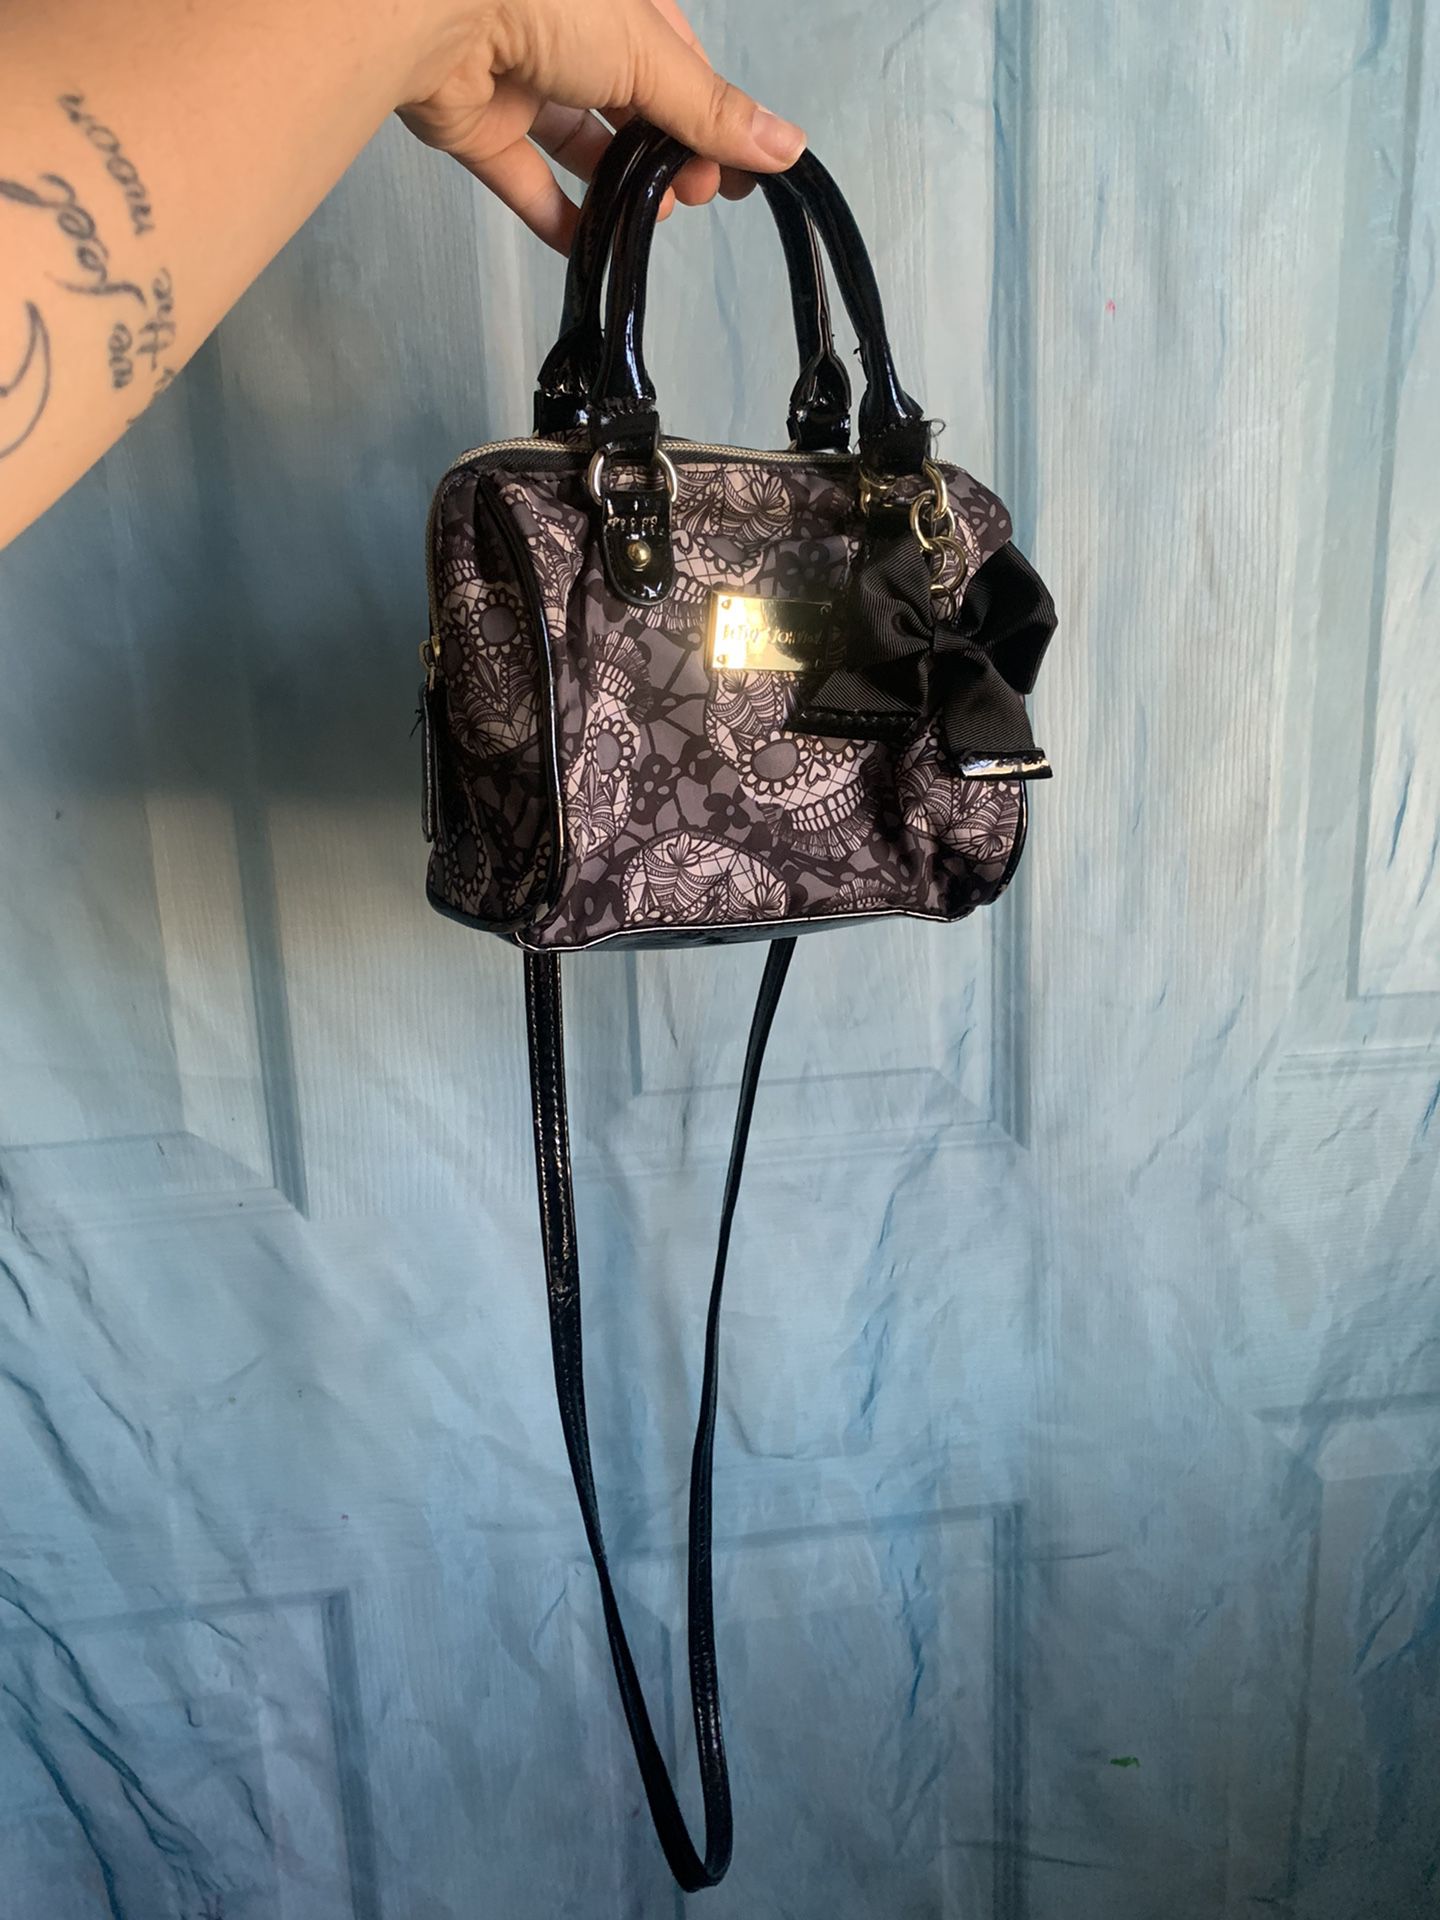 LV Bag for Sale in Tolleson, AZ - OfferUp